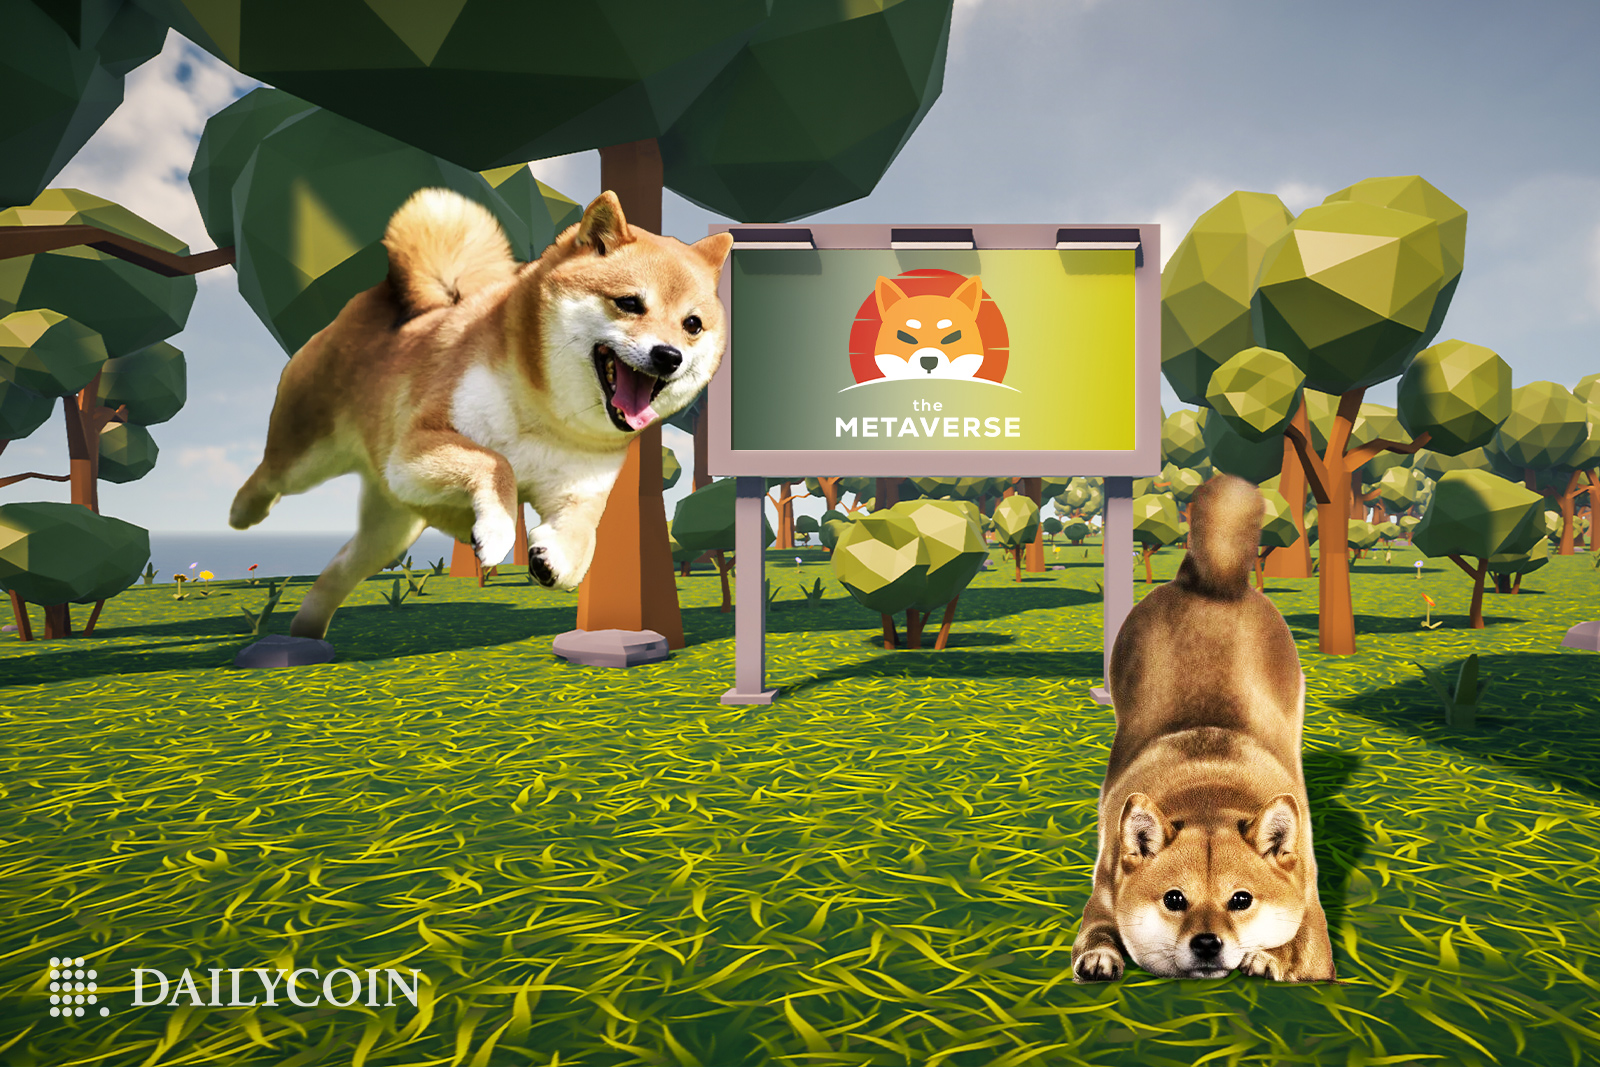 Two happy Shiba Inu dogs are running around in a green field with pixelated trees and a large banner of SHIB.